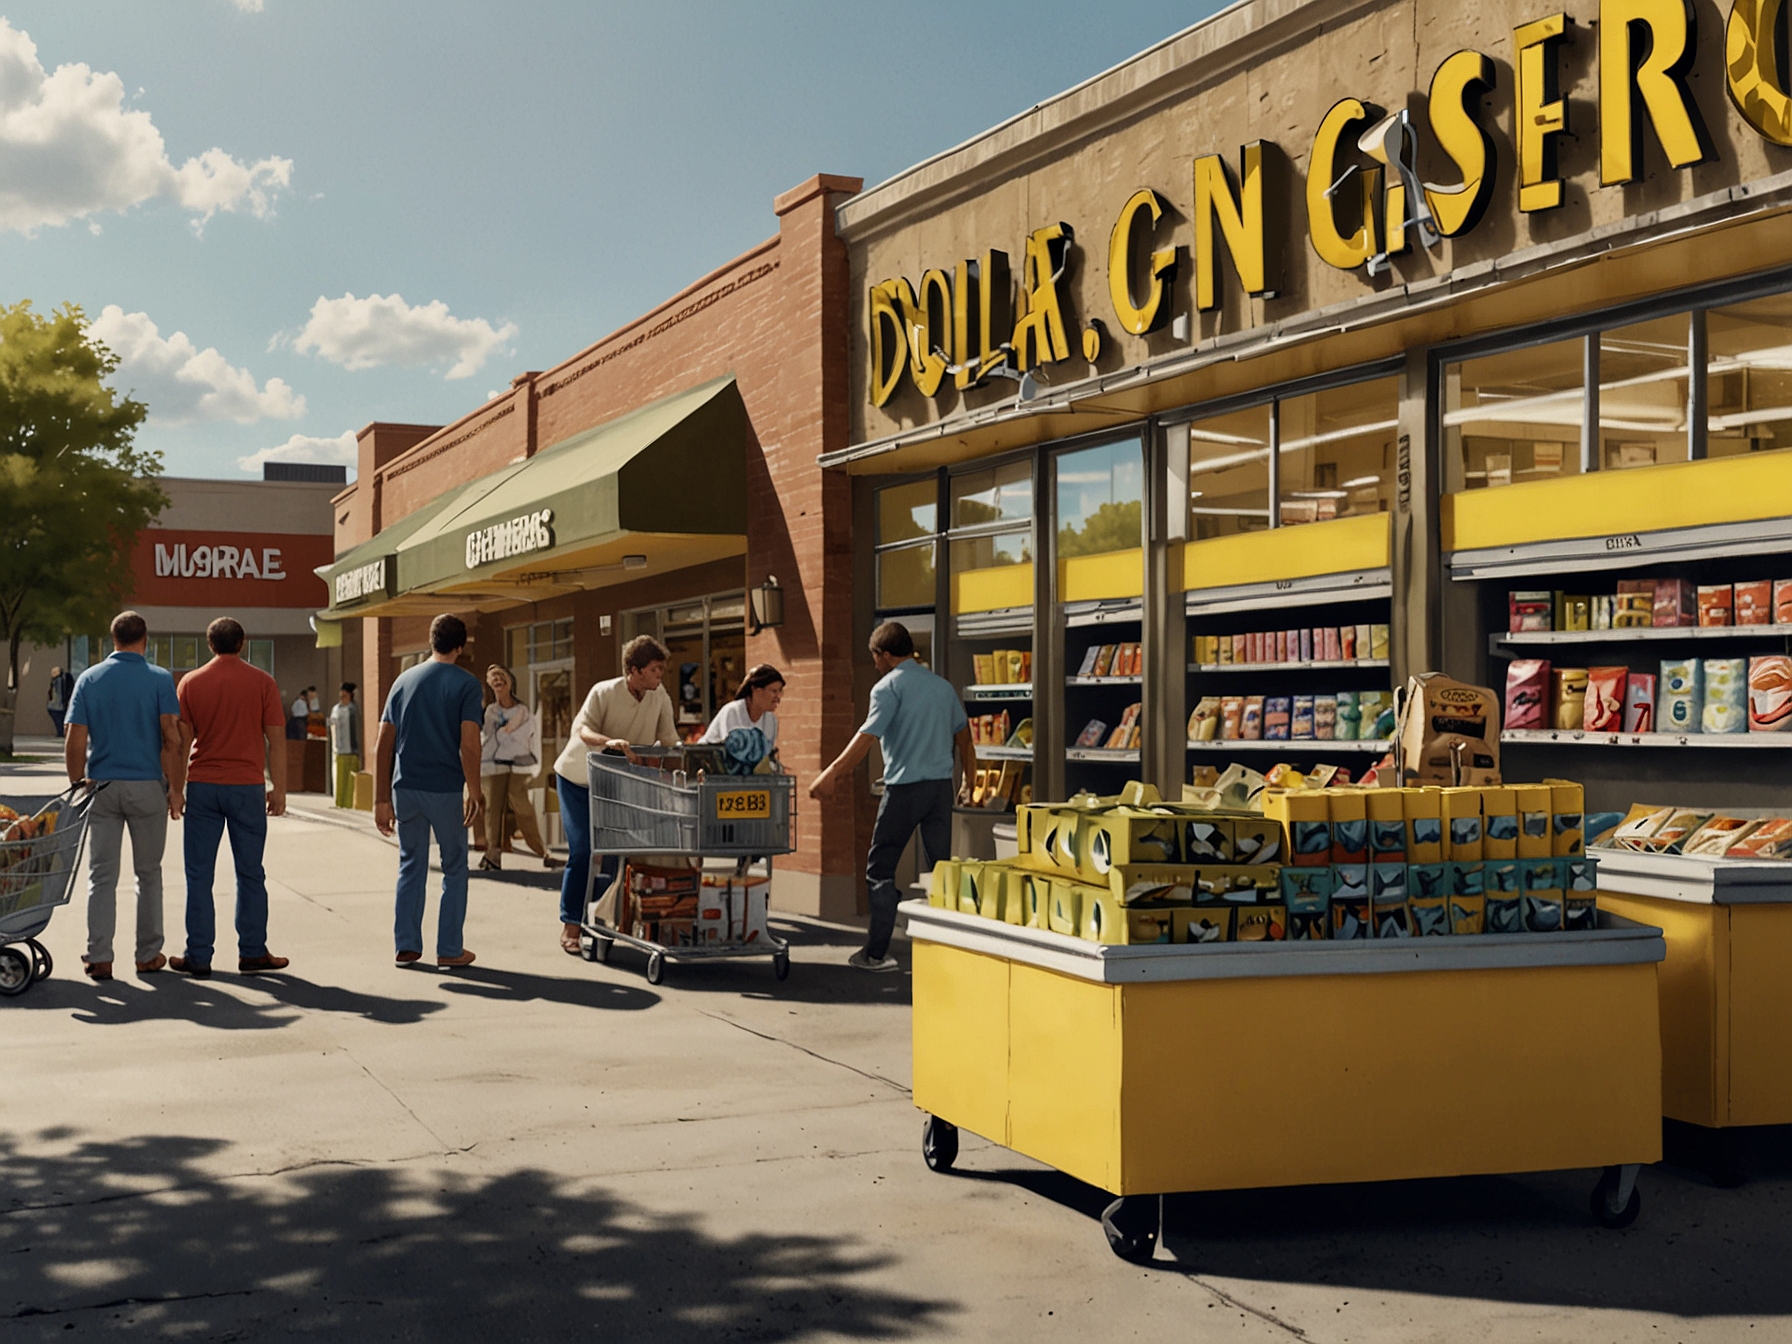 Illustration of a Dollar General store with customers filling their shopping carts. This image highlights Dollar General's appeal to budget-conscious consumers seeking affordable household goods.